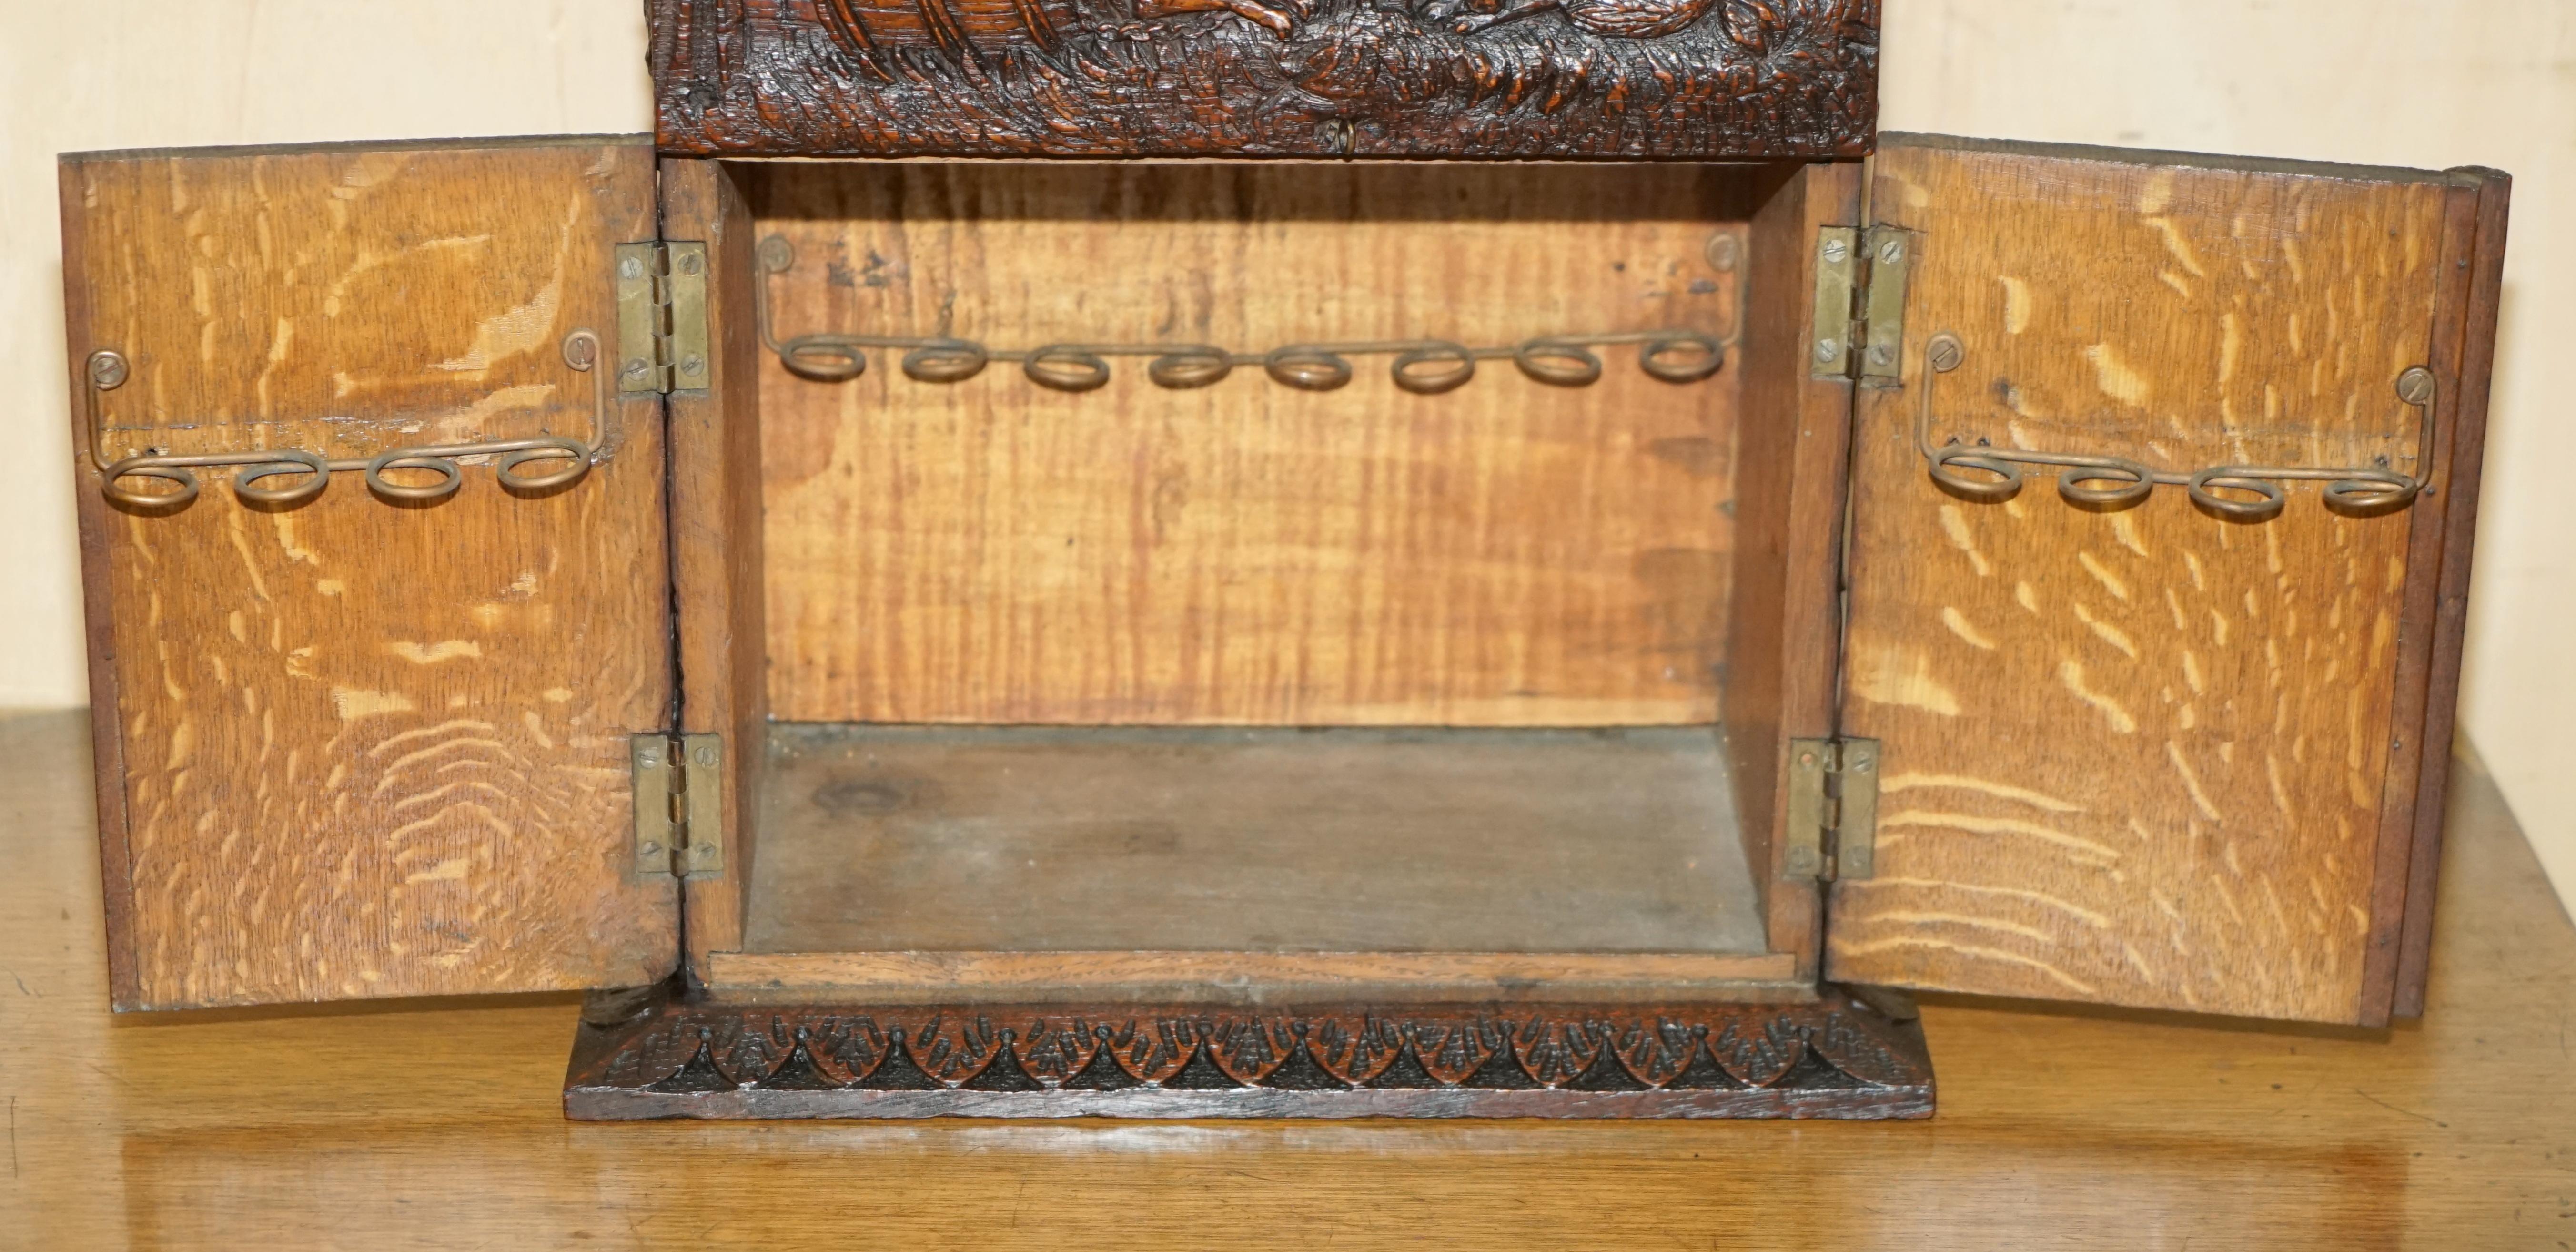 CARVED BLACK FOREST WOOD SMOKiNG PIPE CABINET BOX LATIN INSCRIBED NIL NISI CRUCE For Sale 9